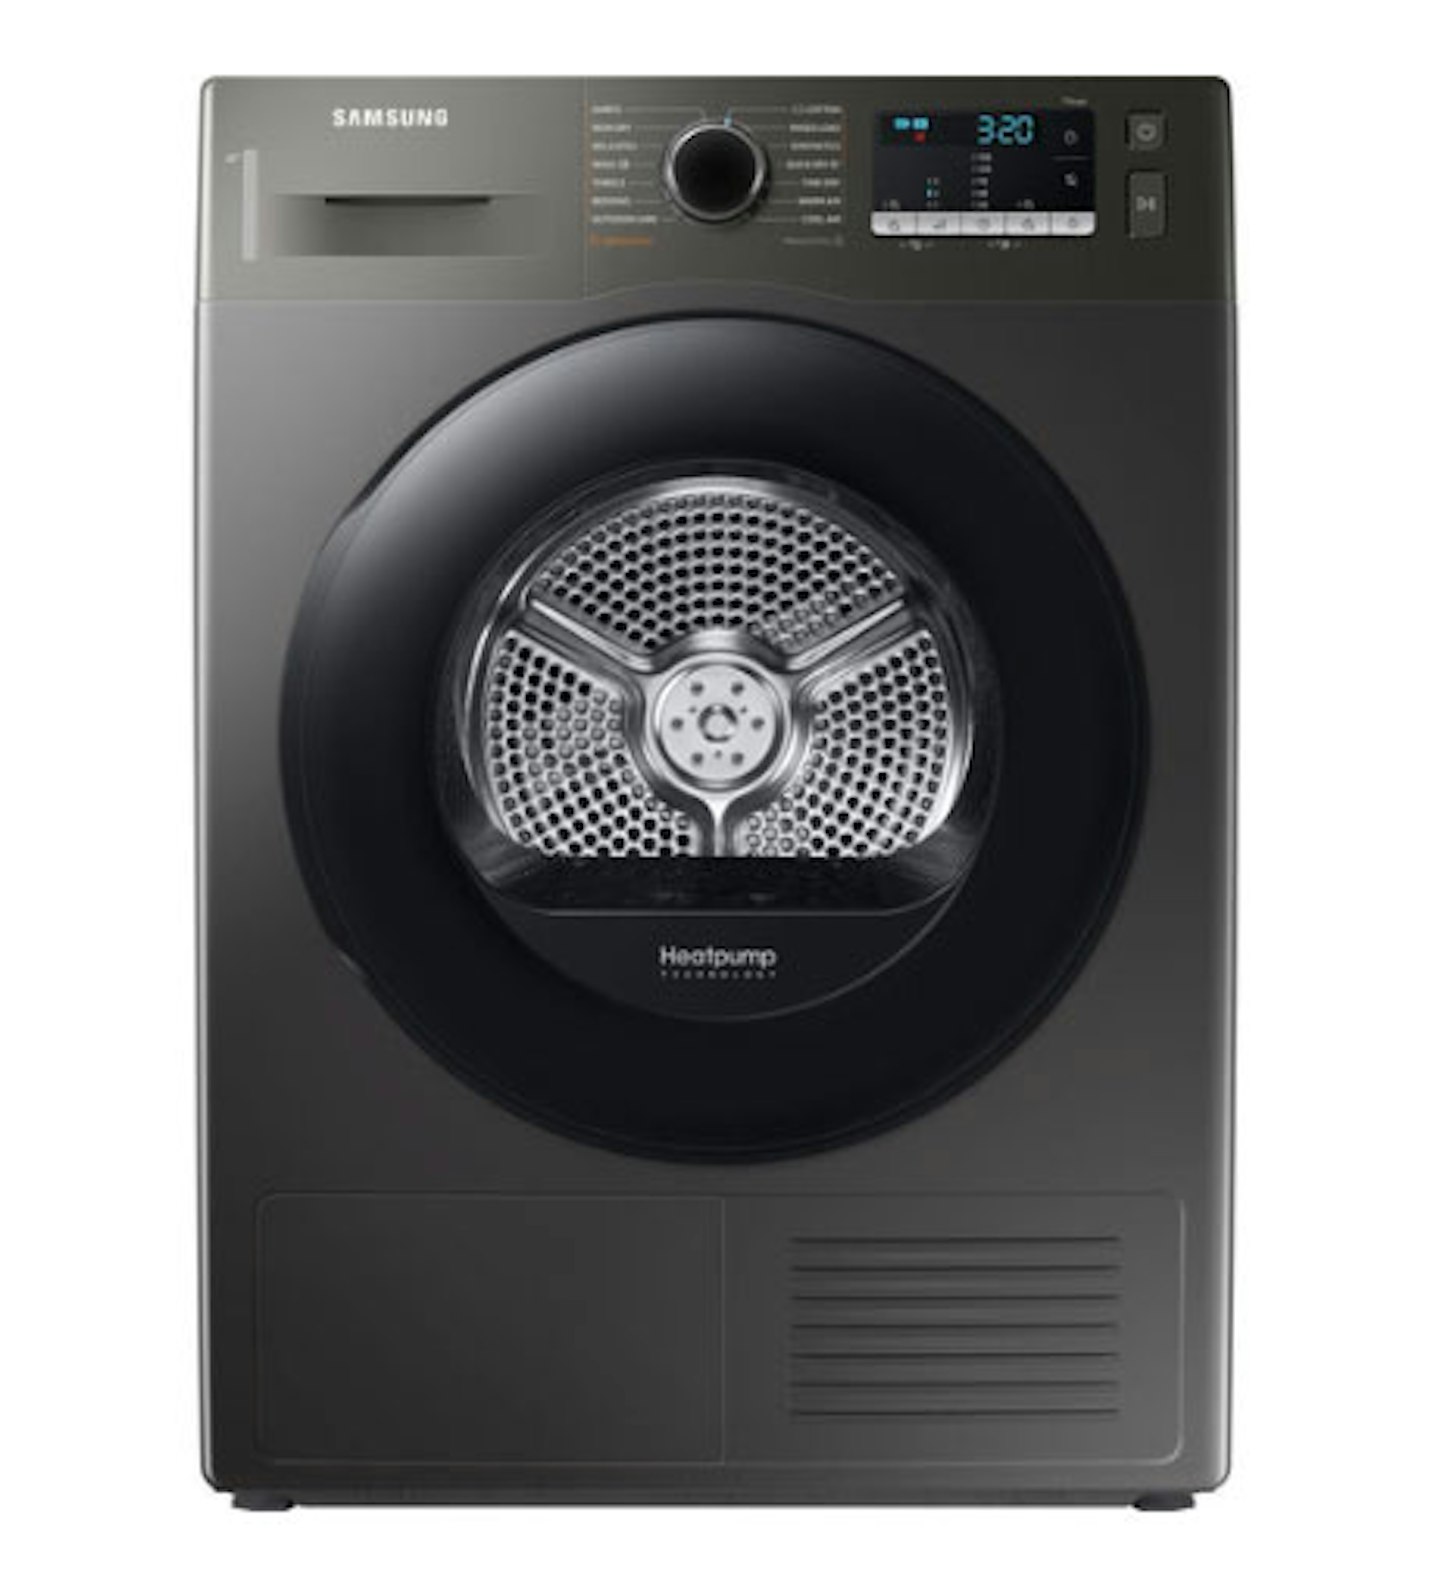 Best integrated tumble dryer - Find the lowest price on